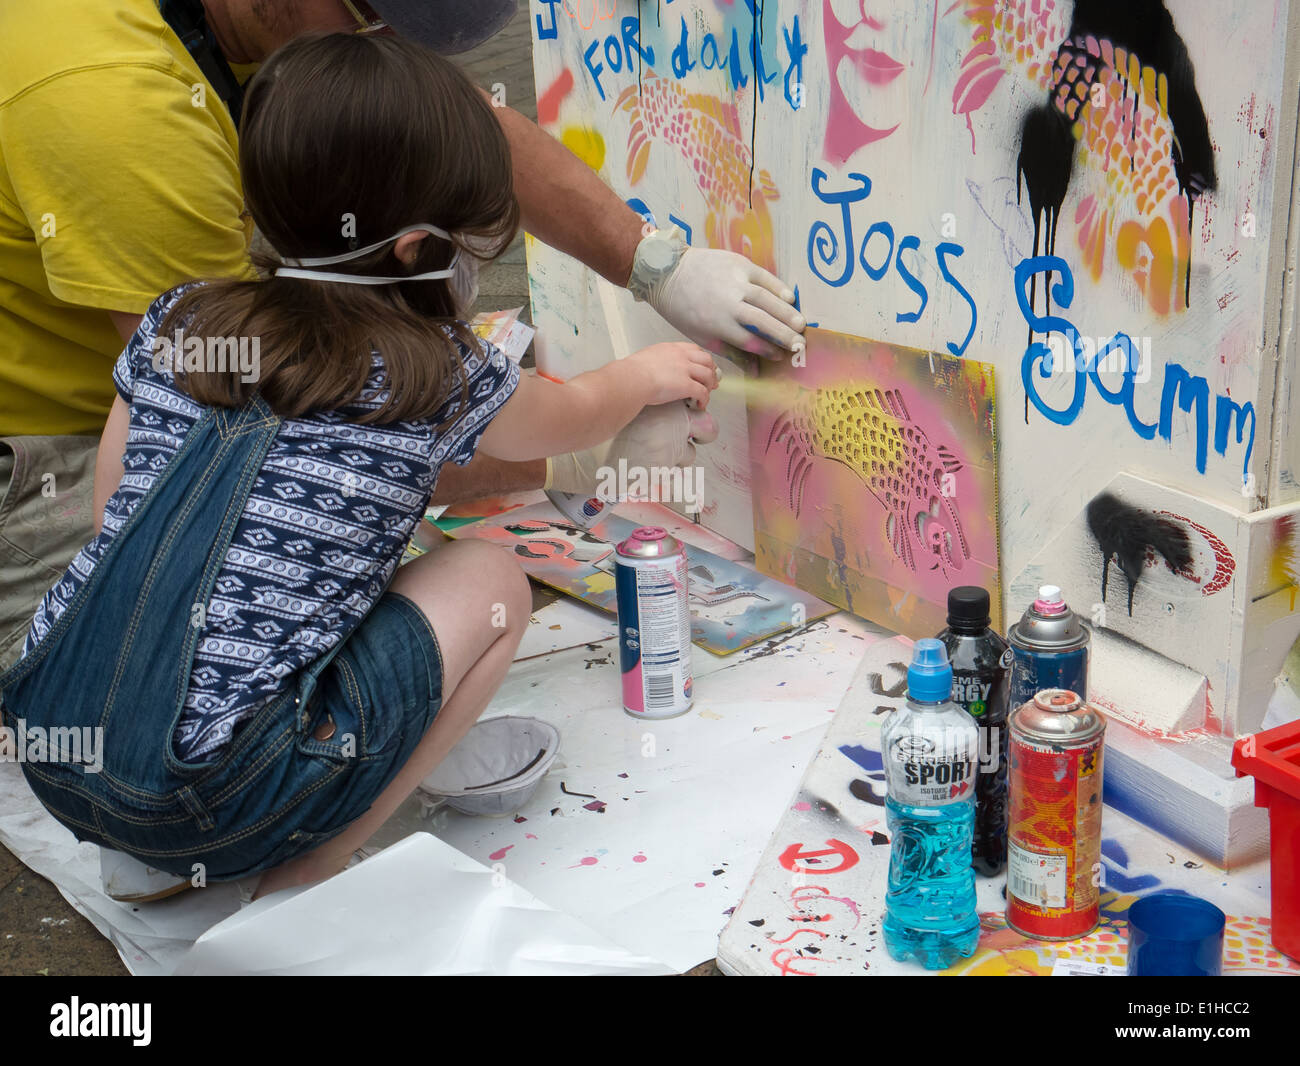 A young girl learns how to stencil using spray paint to make graffiti street art during the Portsmouth street games 2014 Stock Photo